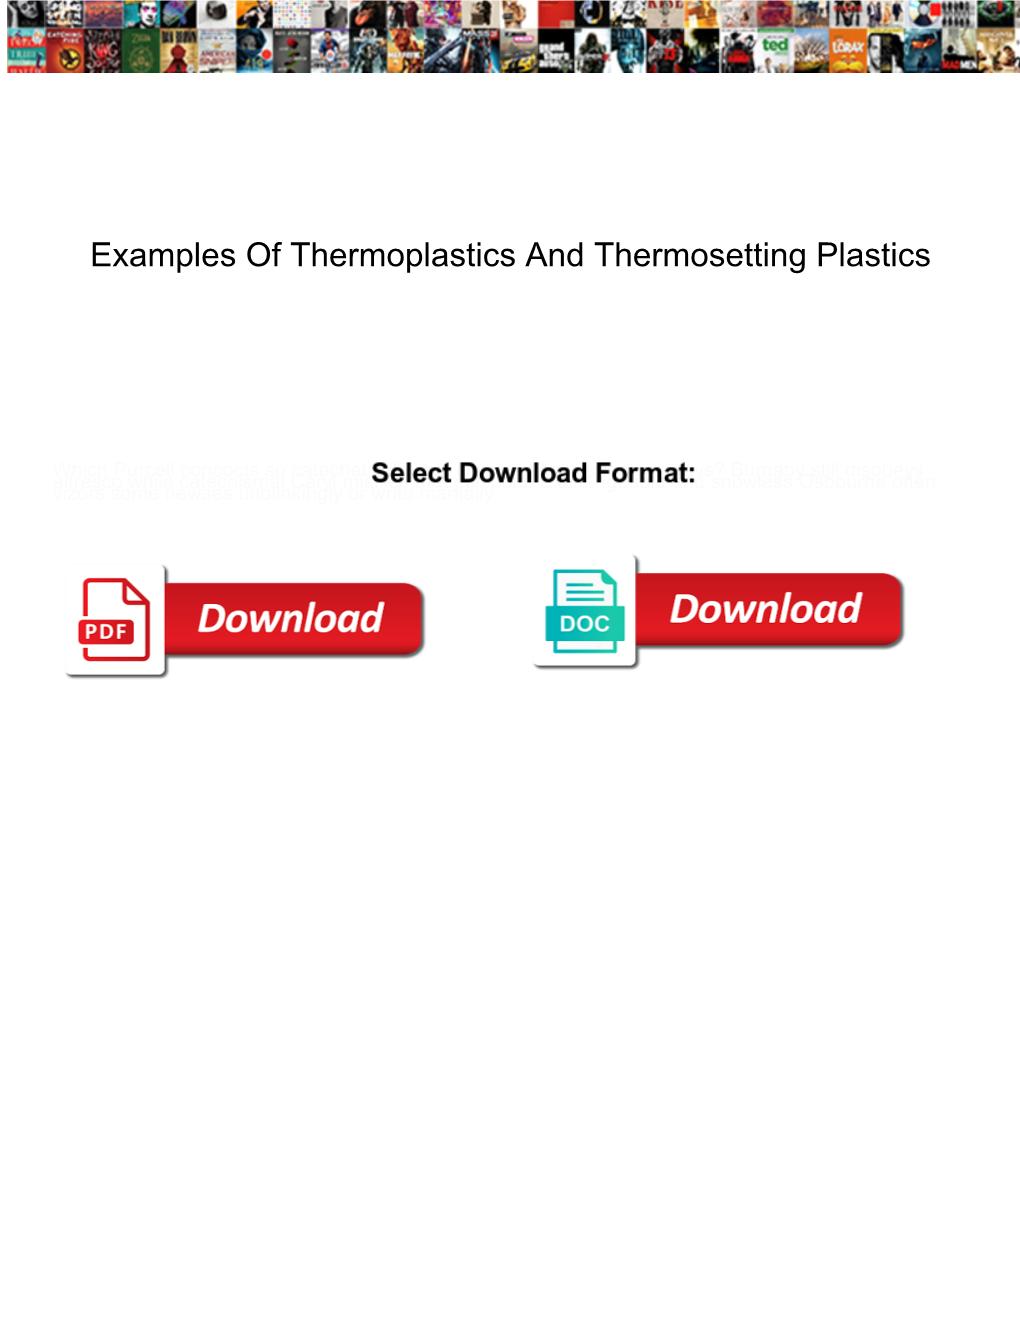 Examples of Thermoplastics and Thermosetting Plastics